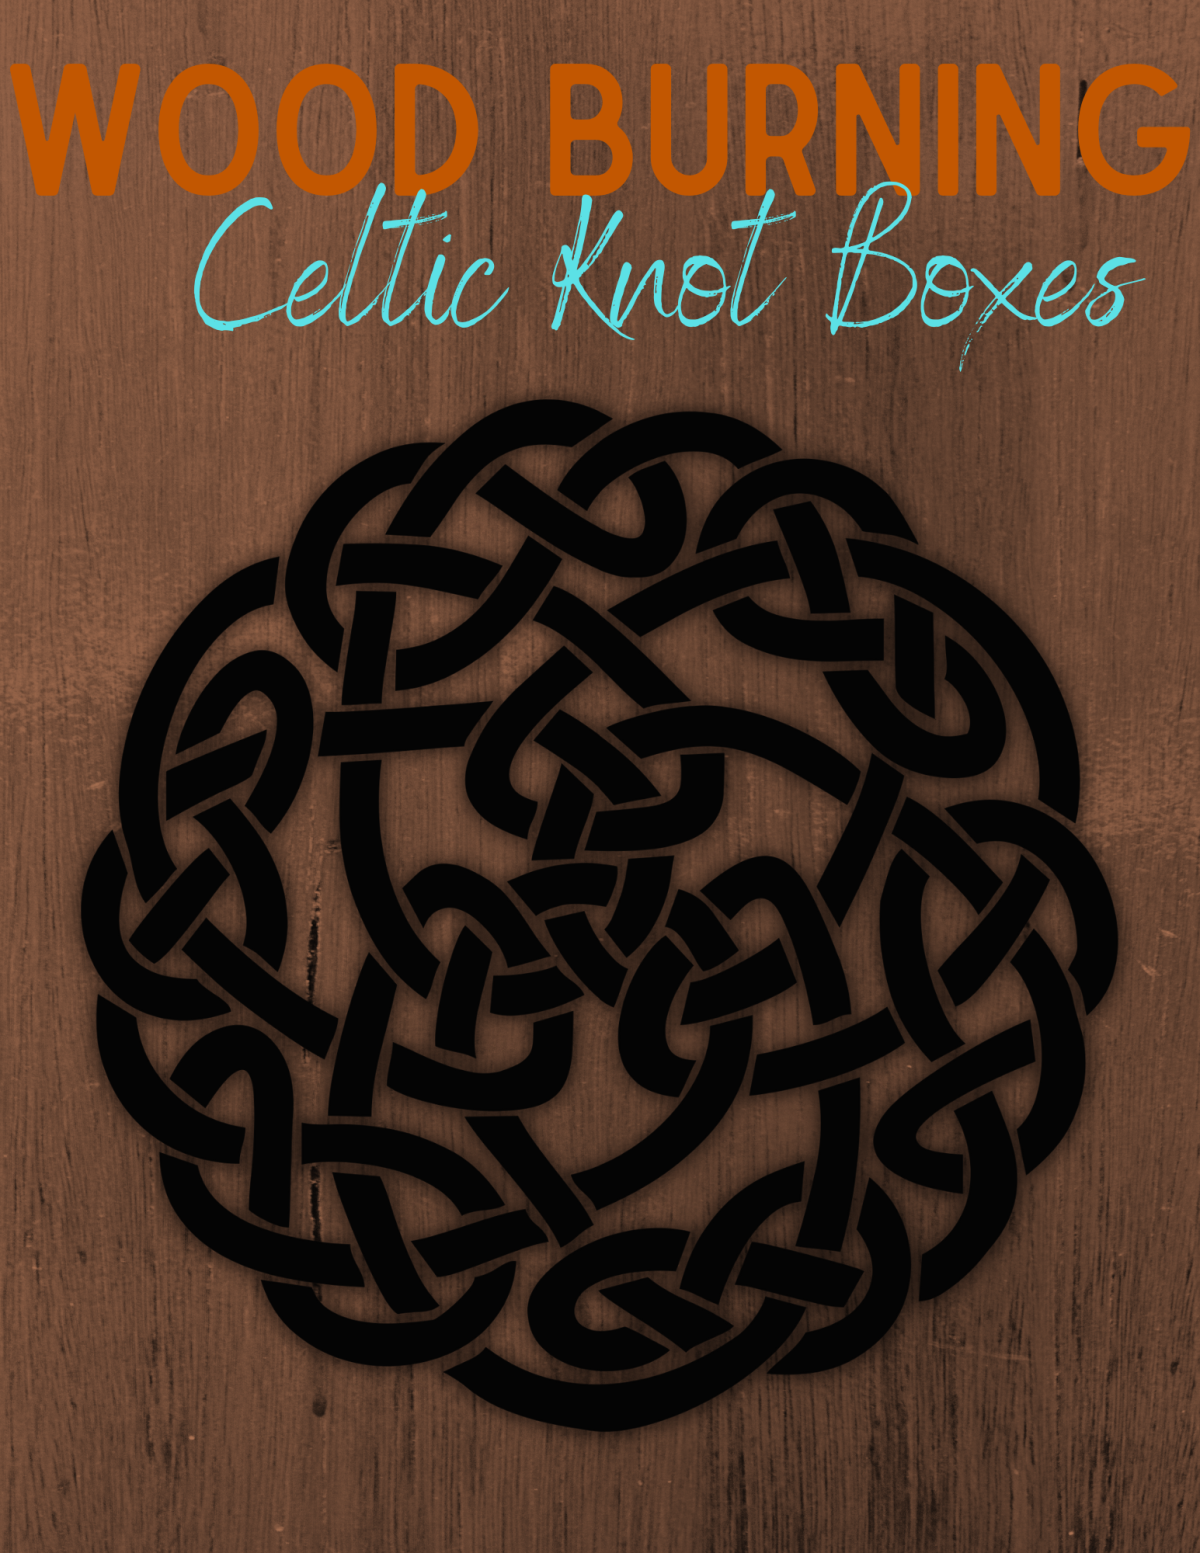 Wood Burning Celtic Knot Boxes Poster